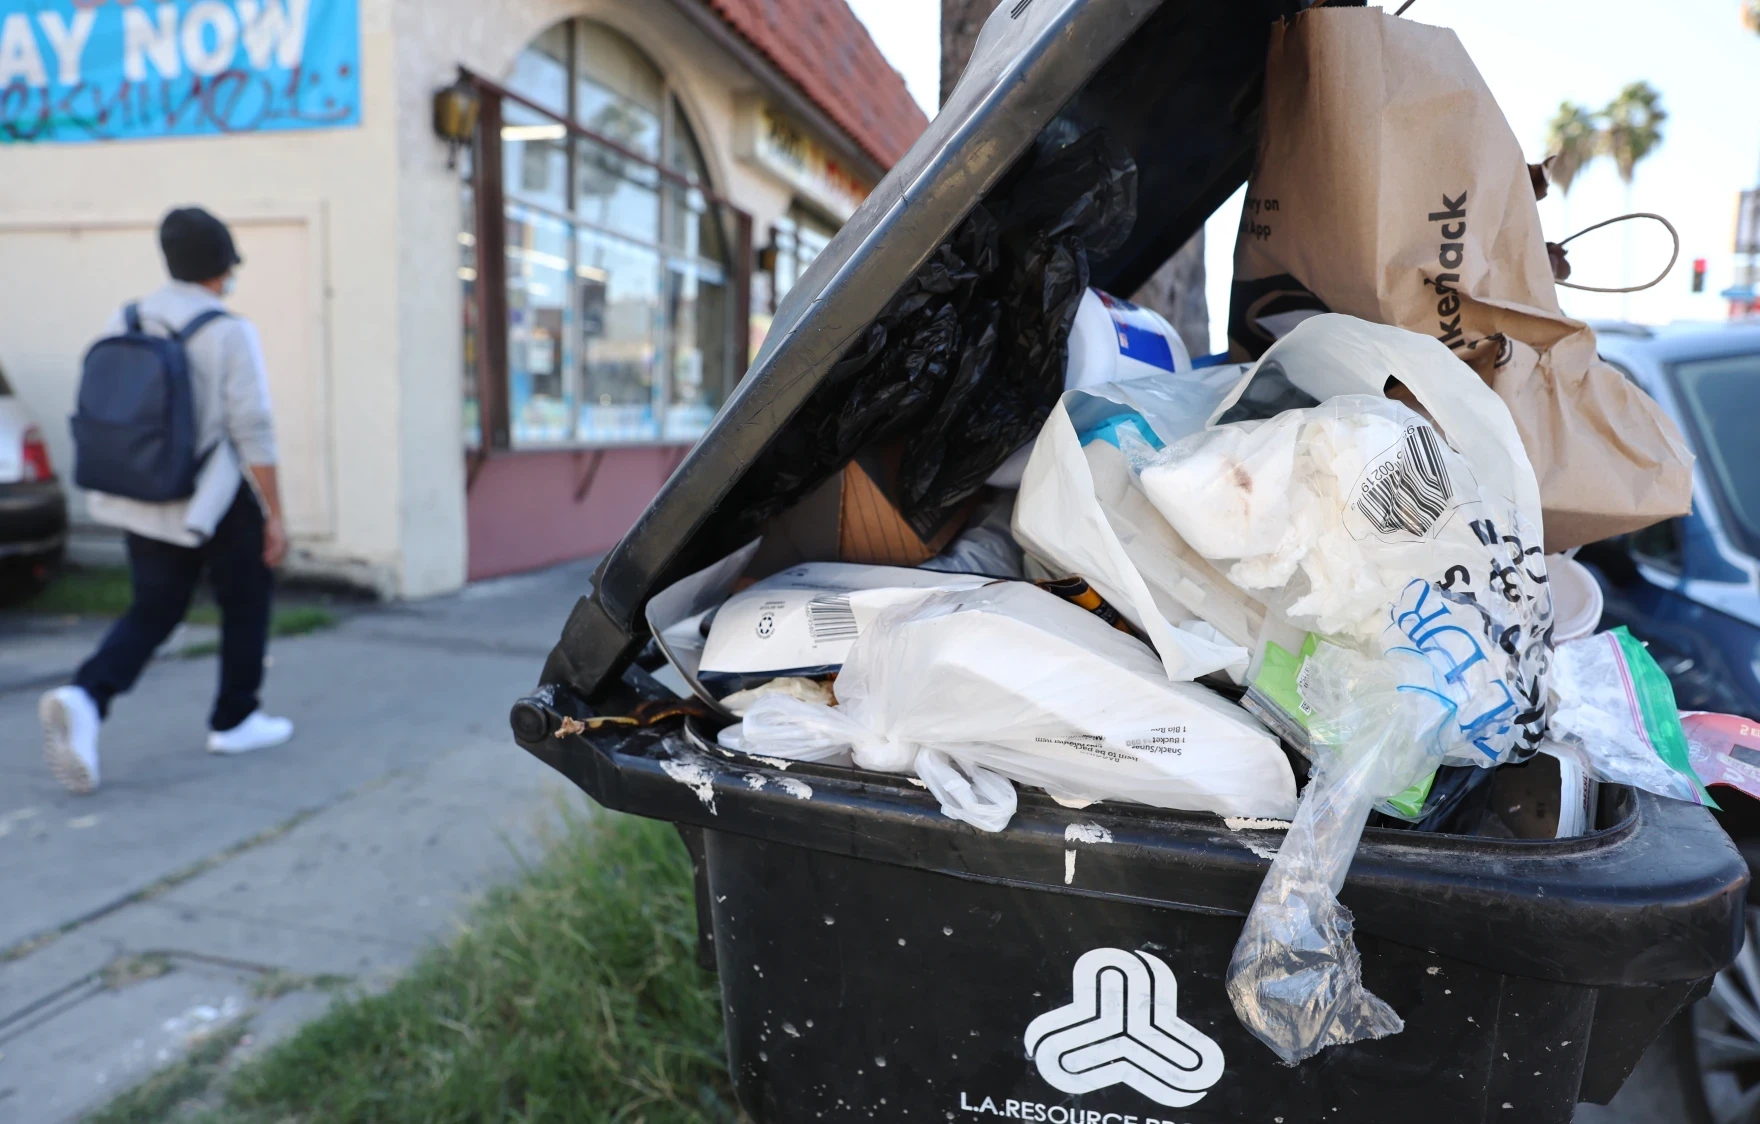 Styrofoam and single-use plastics are now banned in Los Angeles after new laws were passed by Eric Garcetti before he stepped down as Mayor ©Getty Images